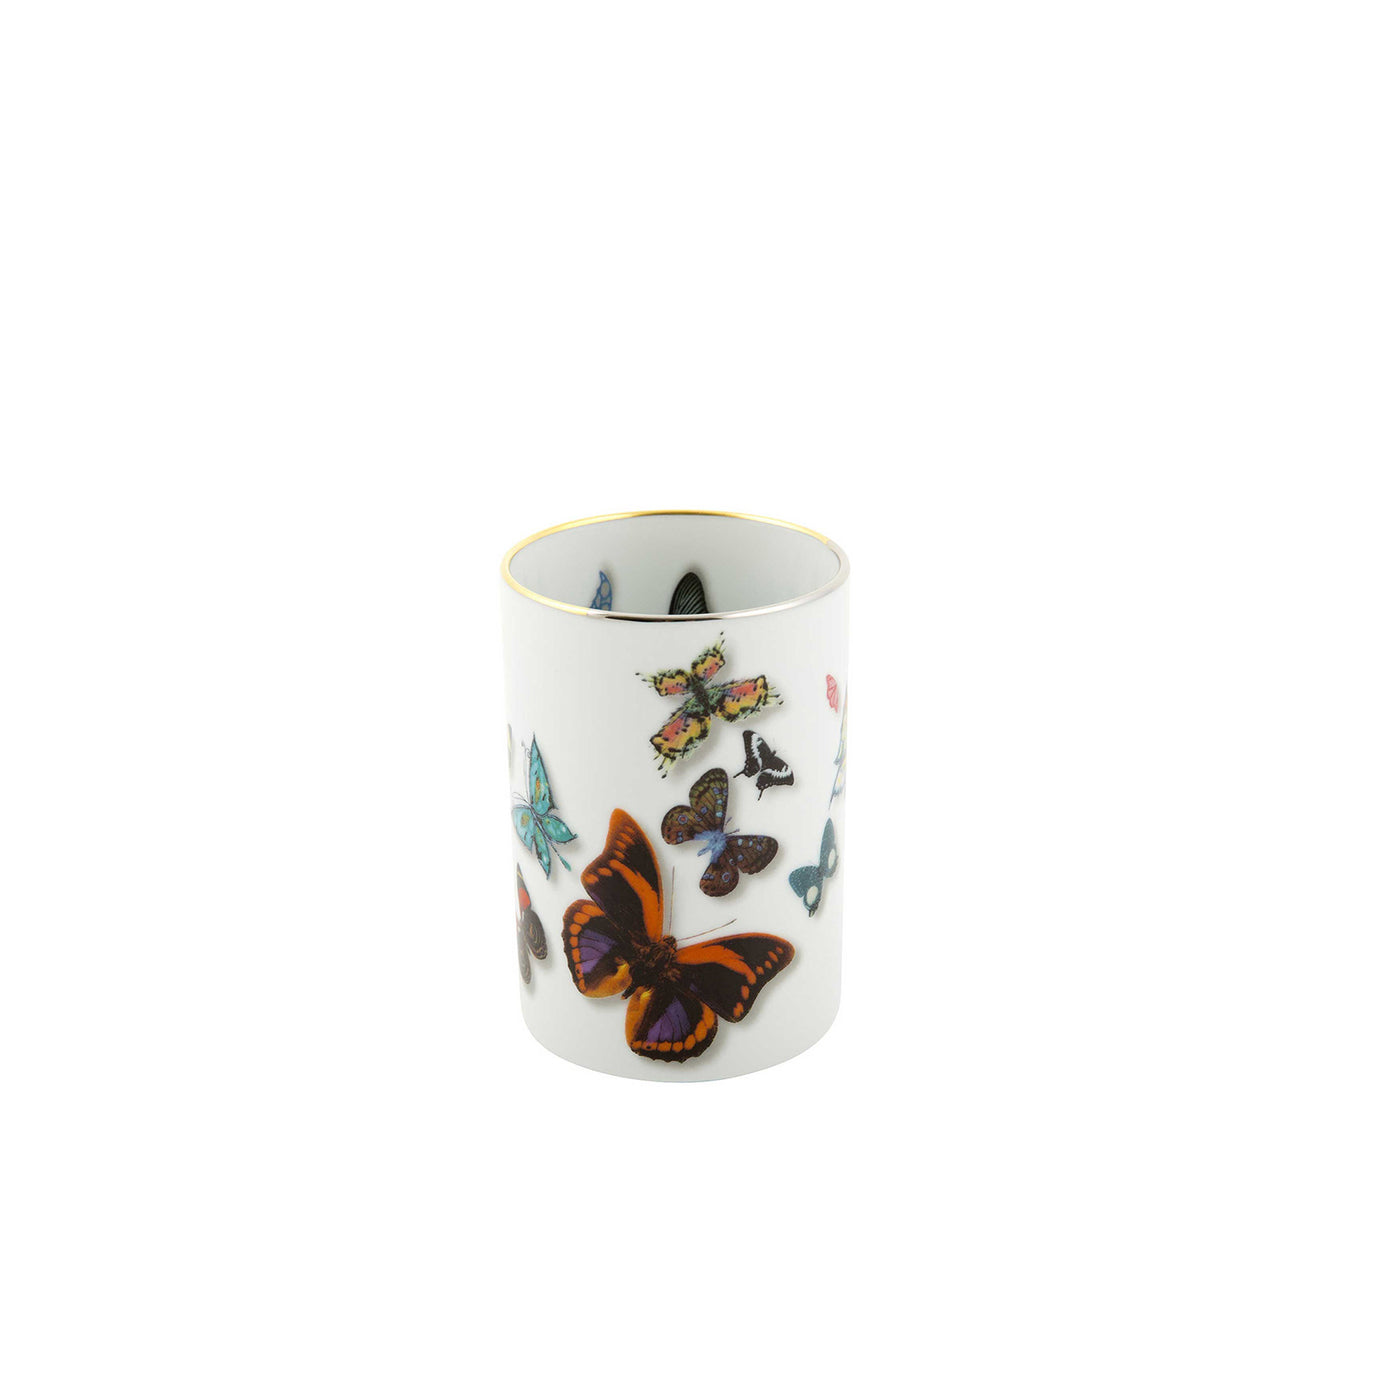 Christian Lacroix: Butterfly Parade Pencil Cup | Julia Moss Designs